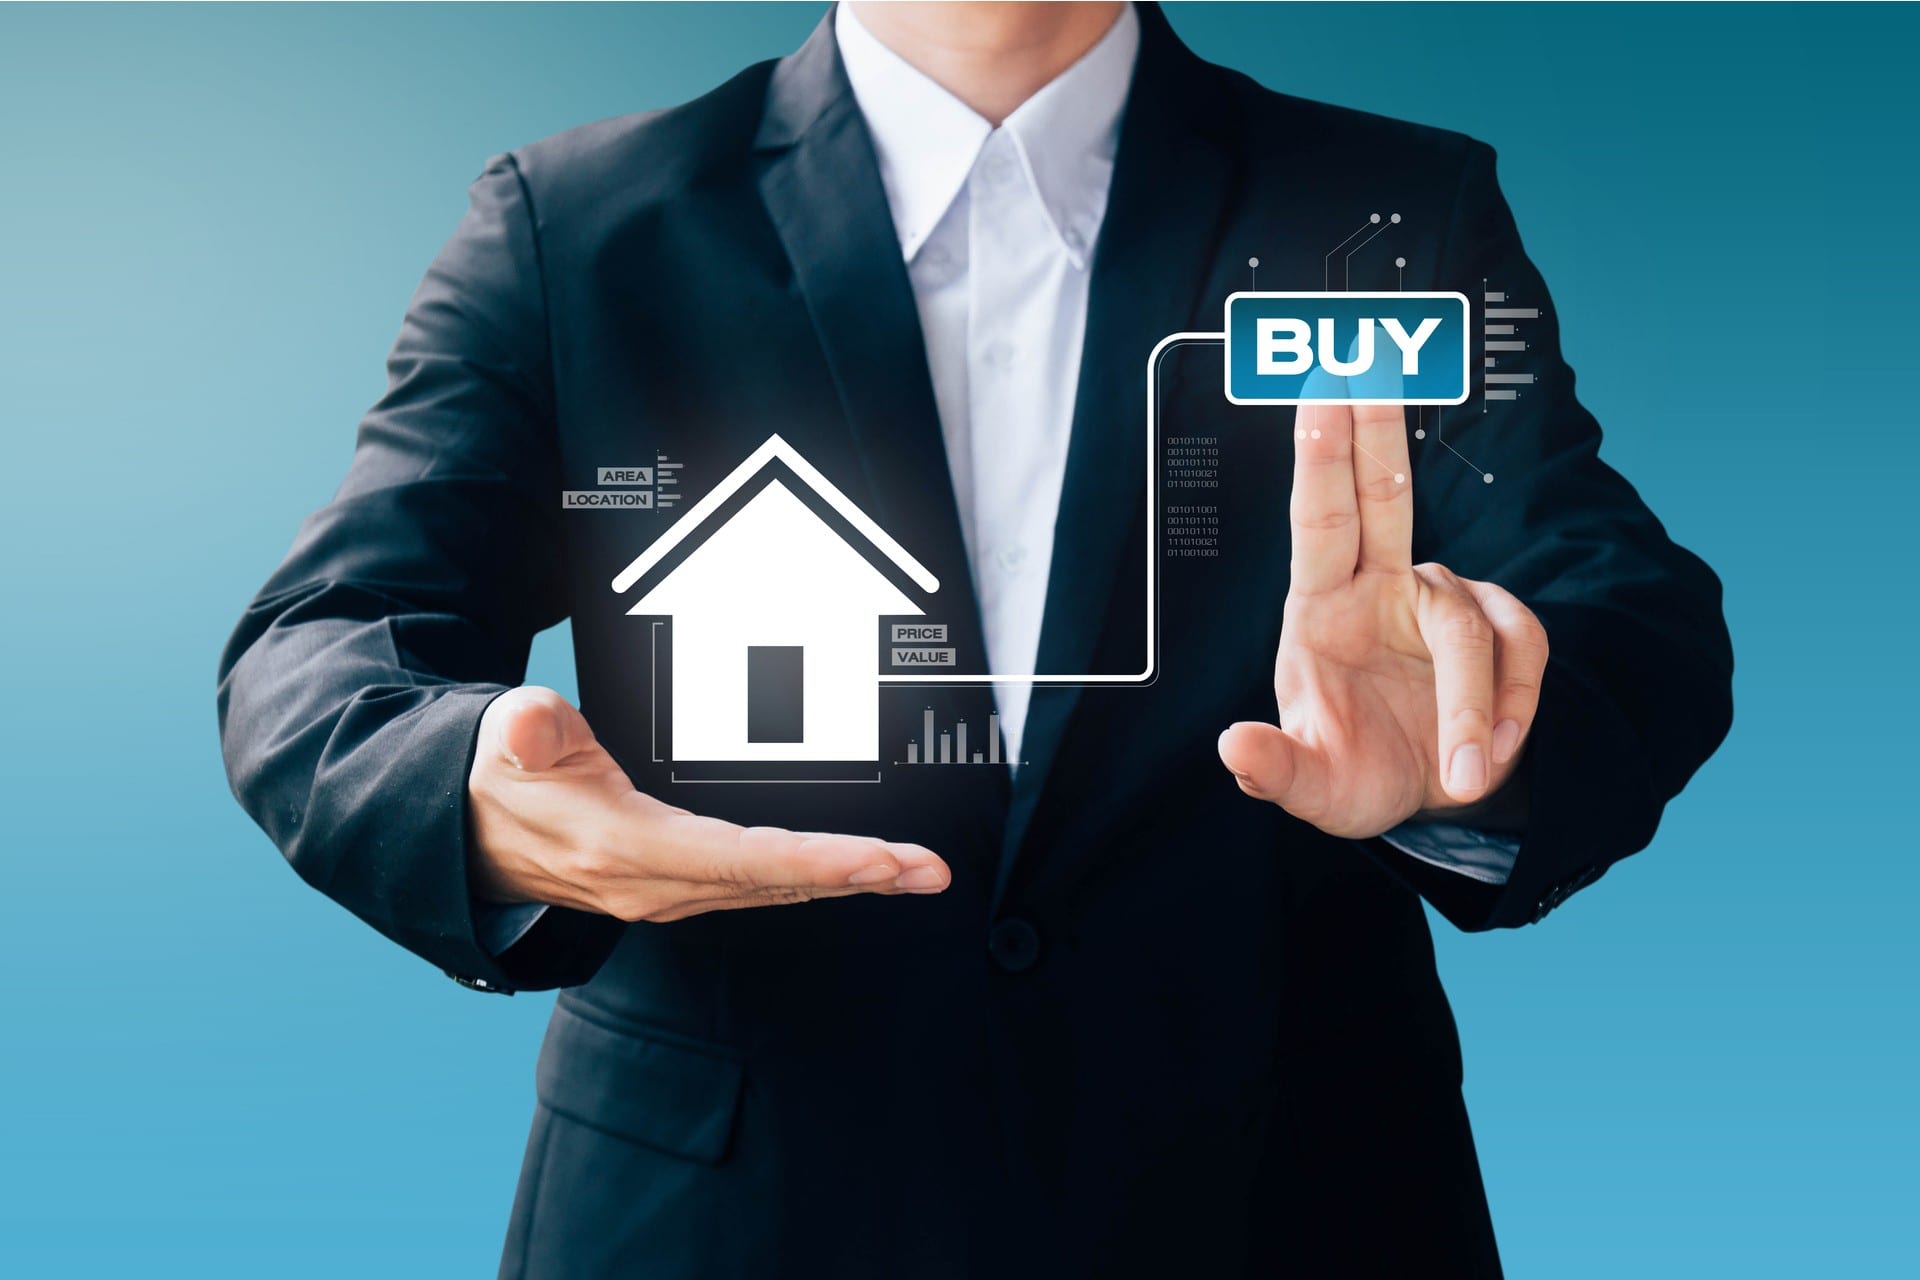 iBuyer Versus Realtor Versus For Sale By Owner (FSBO): Which Of The Three Comes Out On Top?